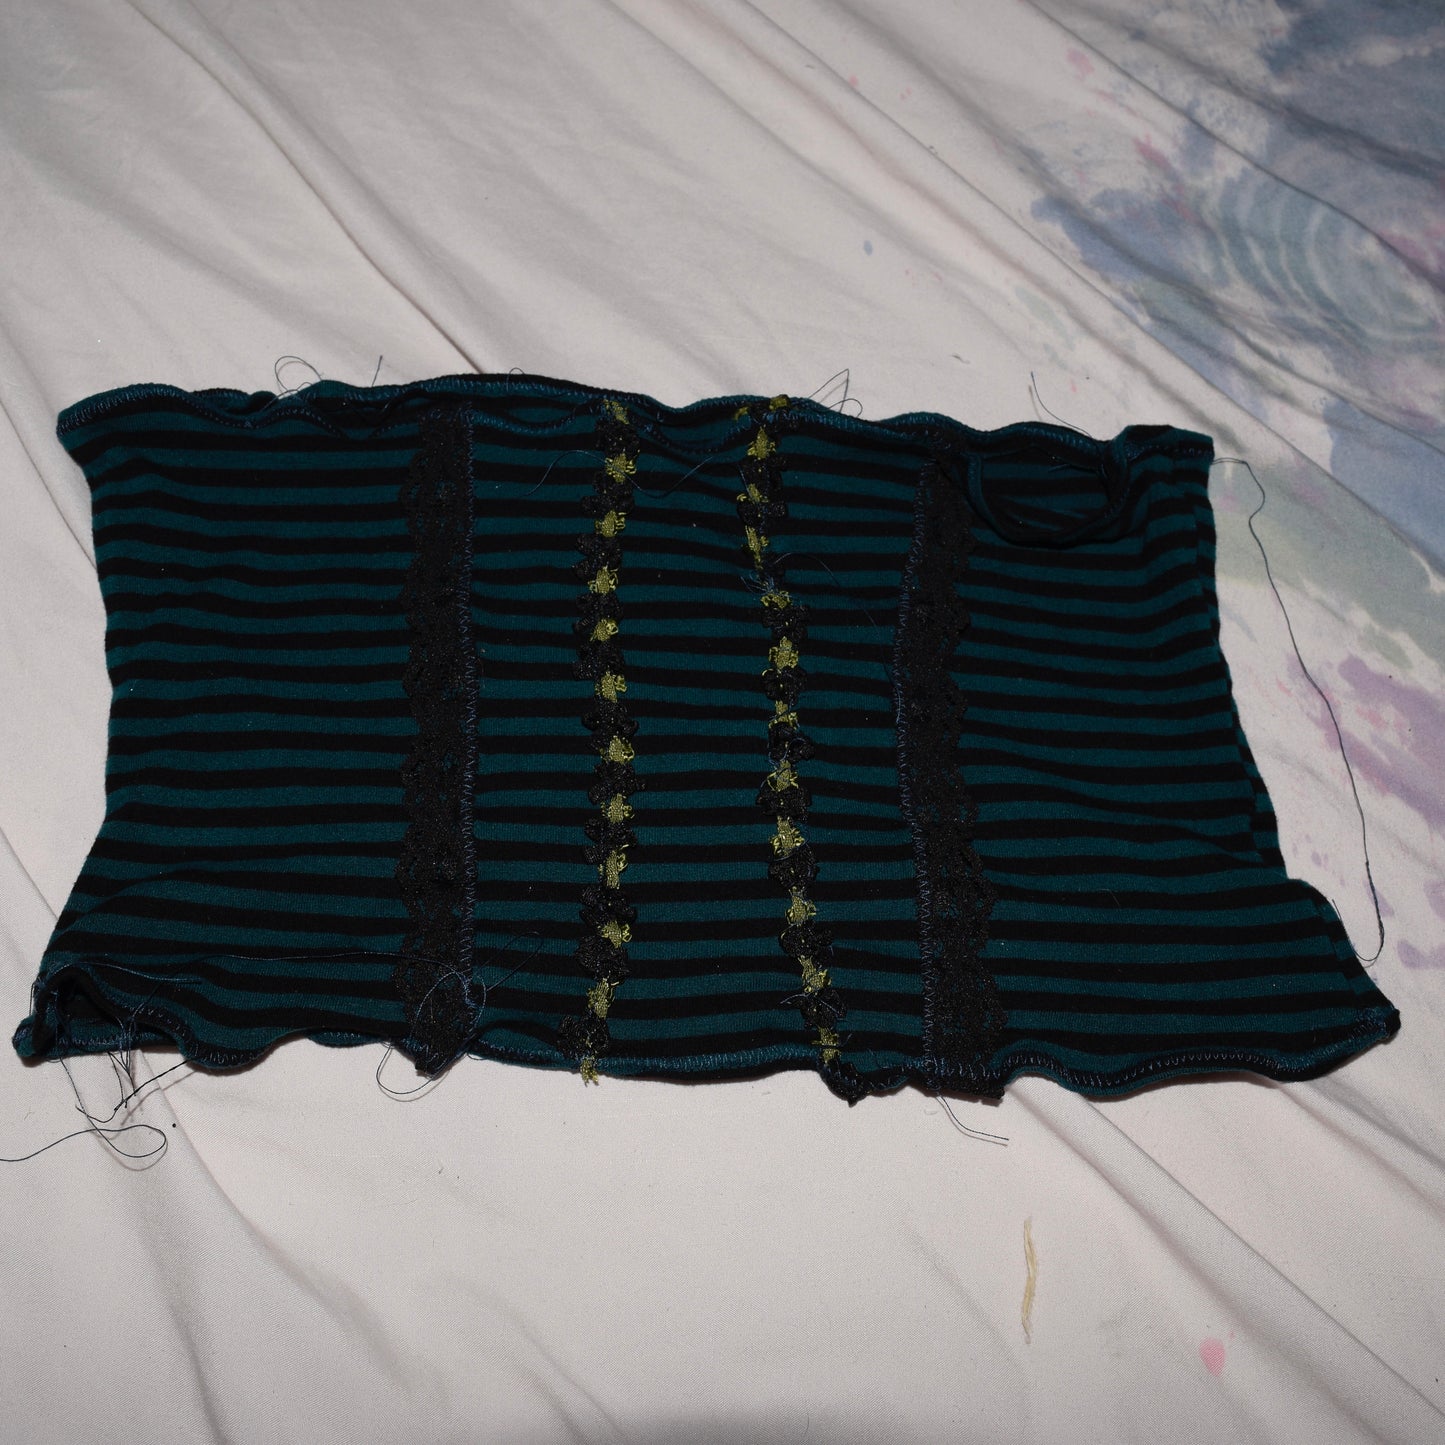 teal striped tube top size XS/S